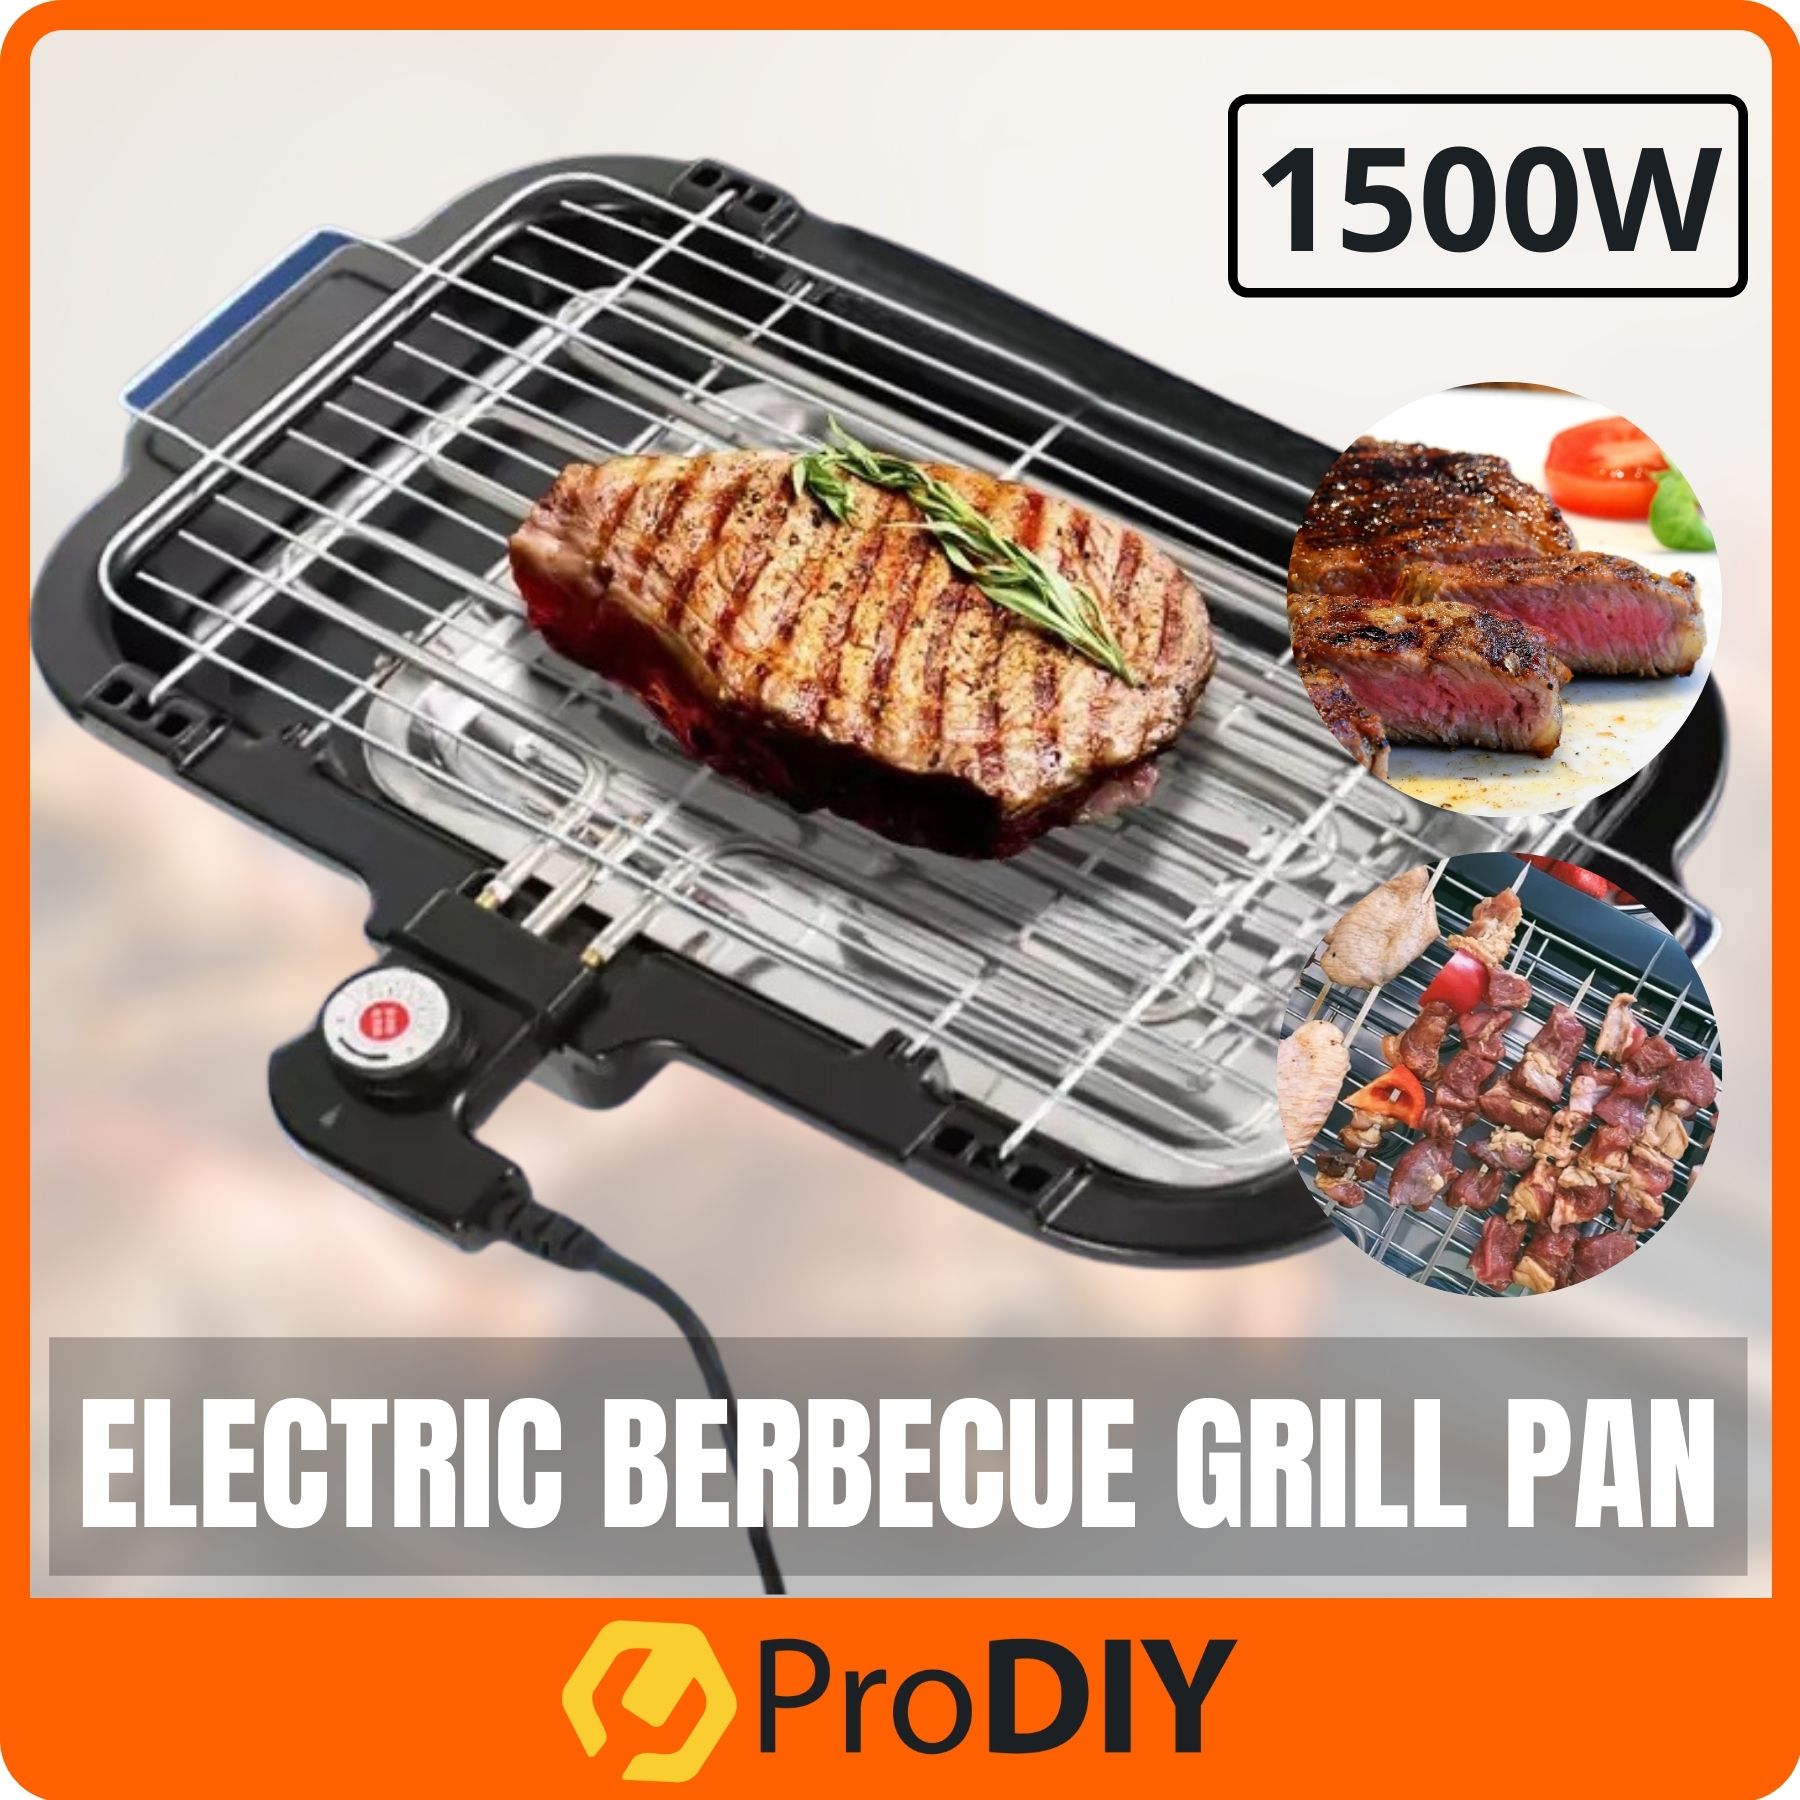 DK-818 Electric Barbeque Grill Pan multi-functional electric barbeque smokeless electric pan electric barbecue grill